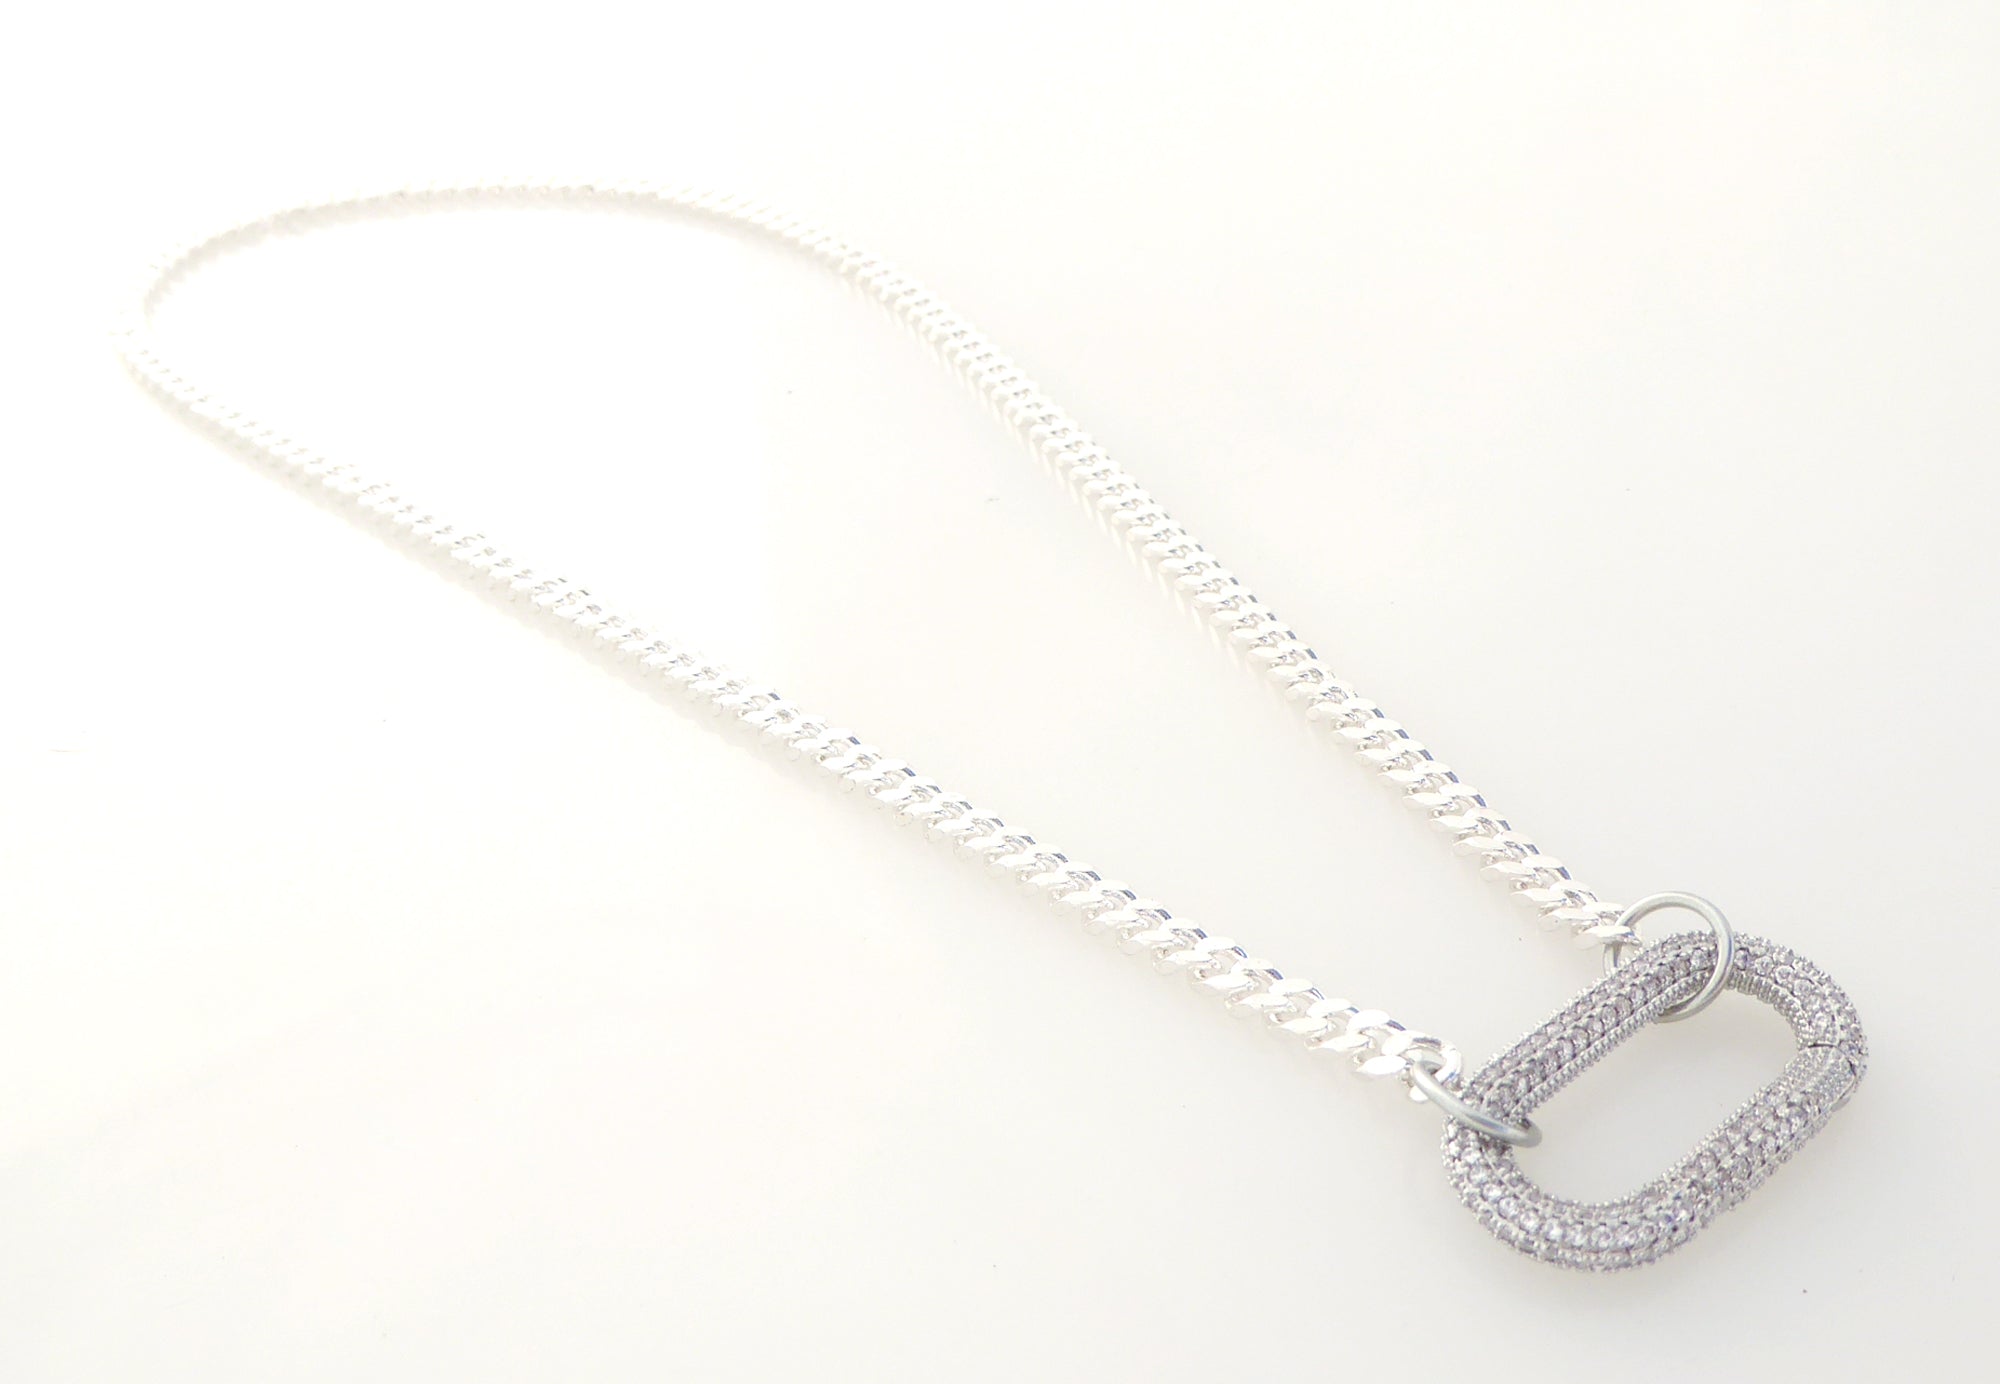 Silver rhinestone carabiner clasp necklace by Jenny Dayco 2